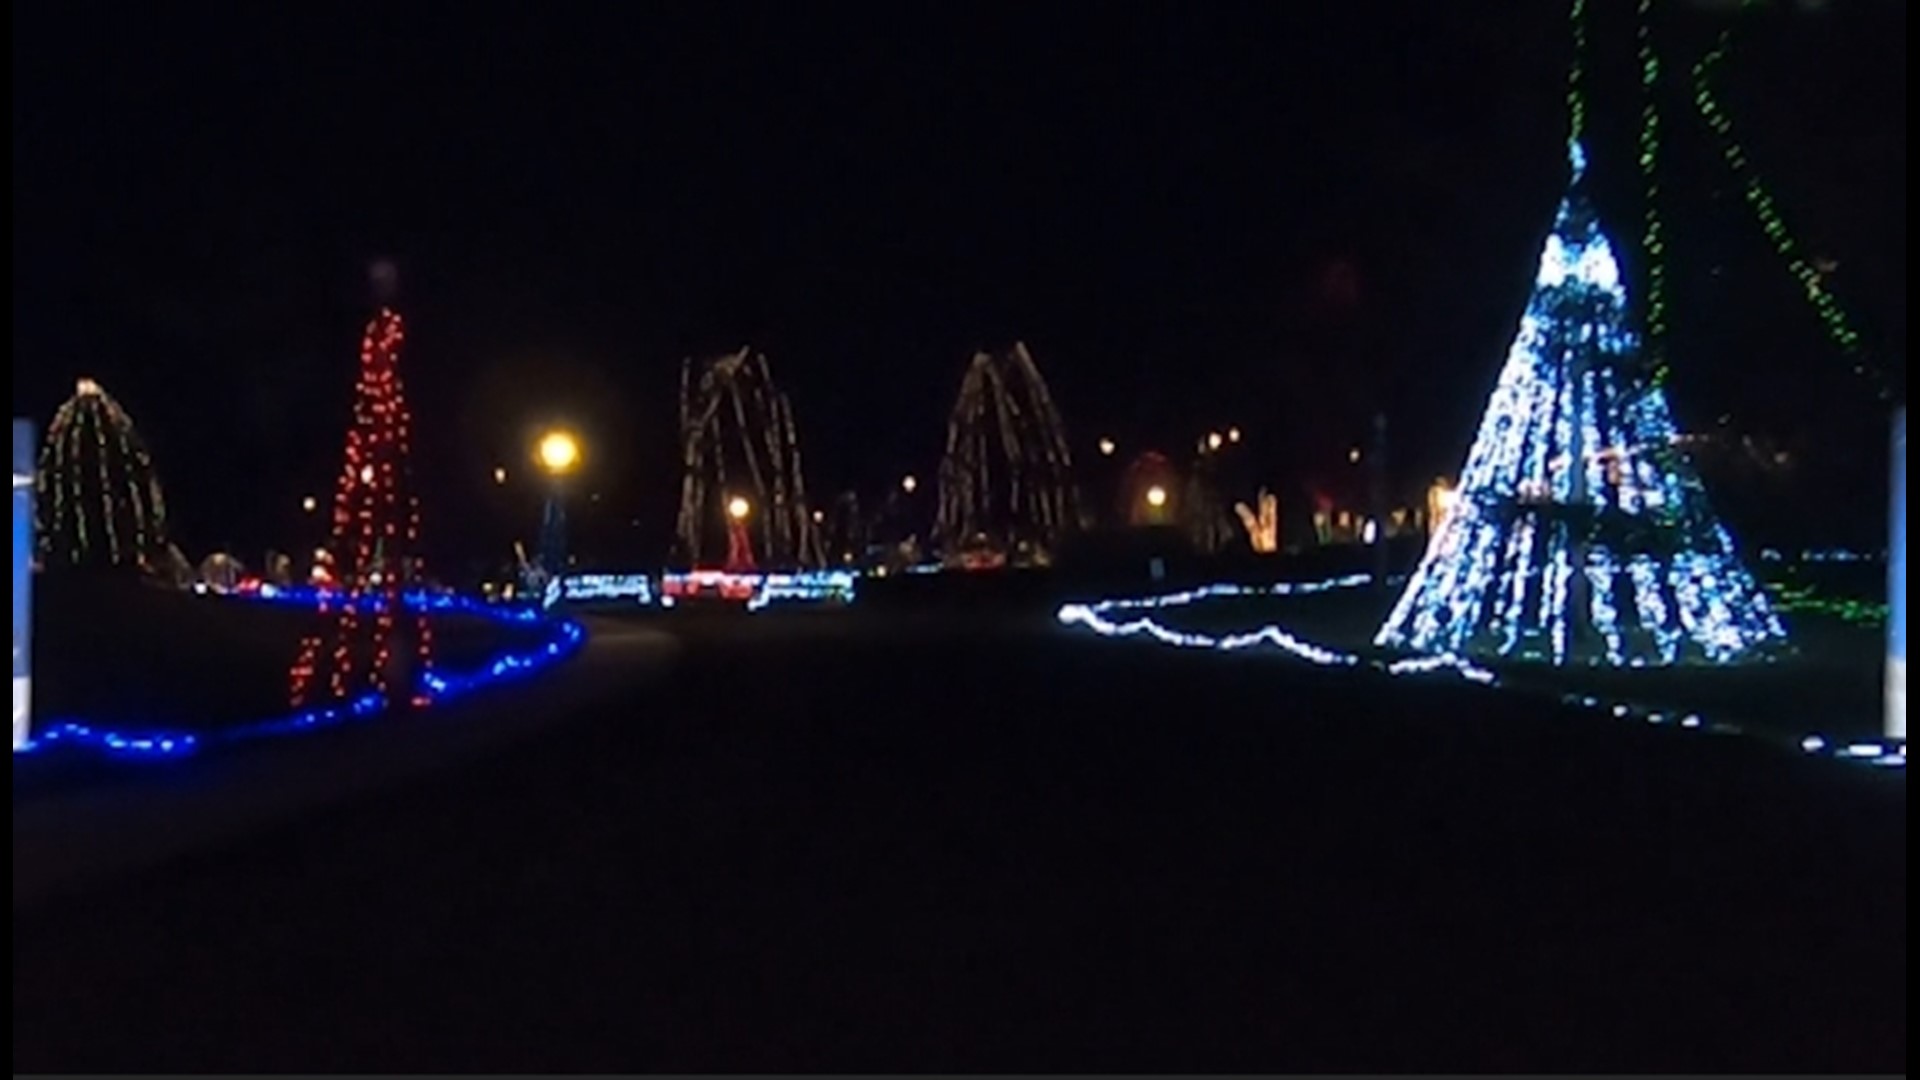 If you need a bit of Christmas cheer, take a tour of Christmas lights with us. Tonight, we drive through Our Lady of the Snows Christmas display